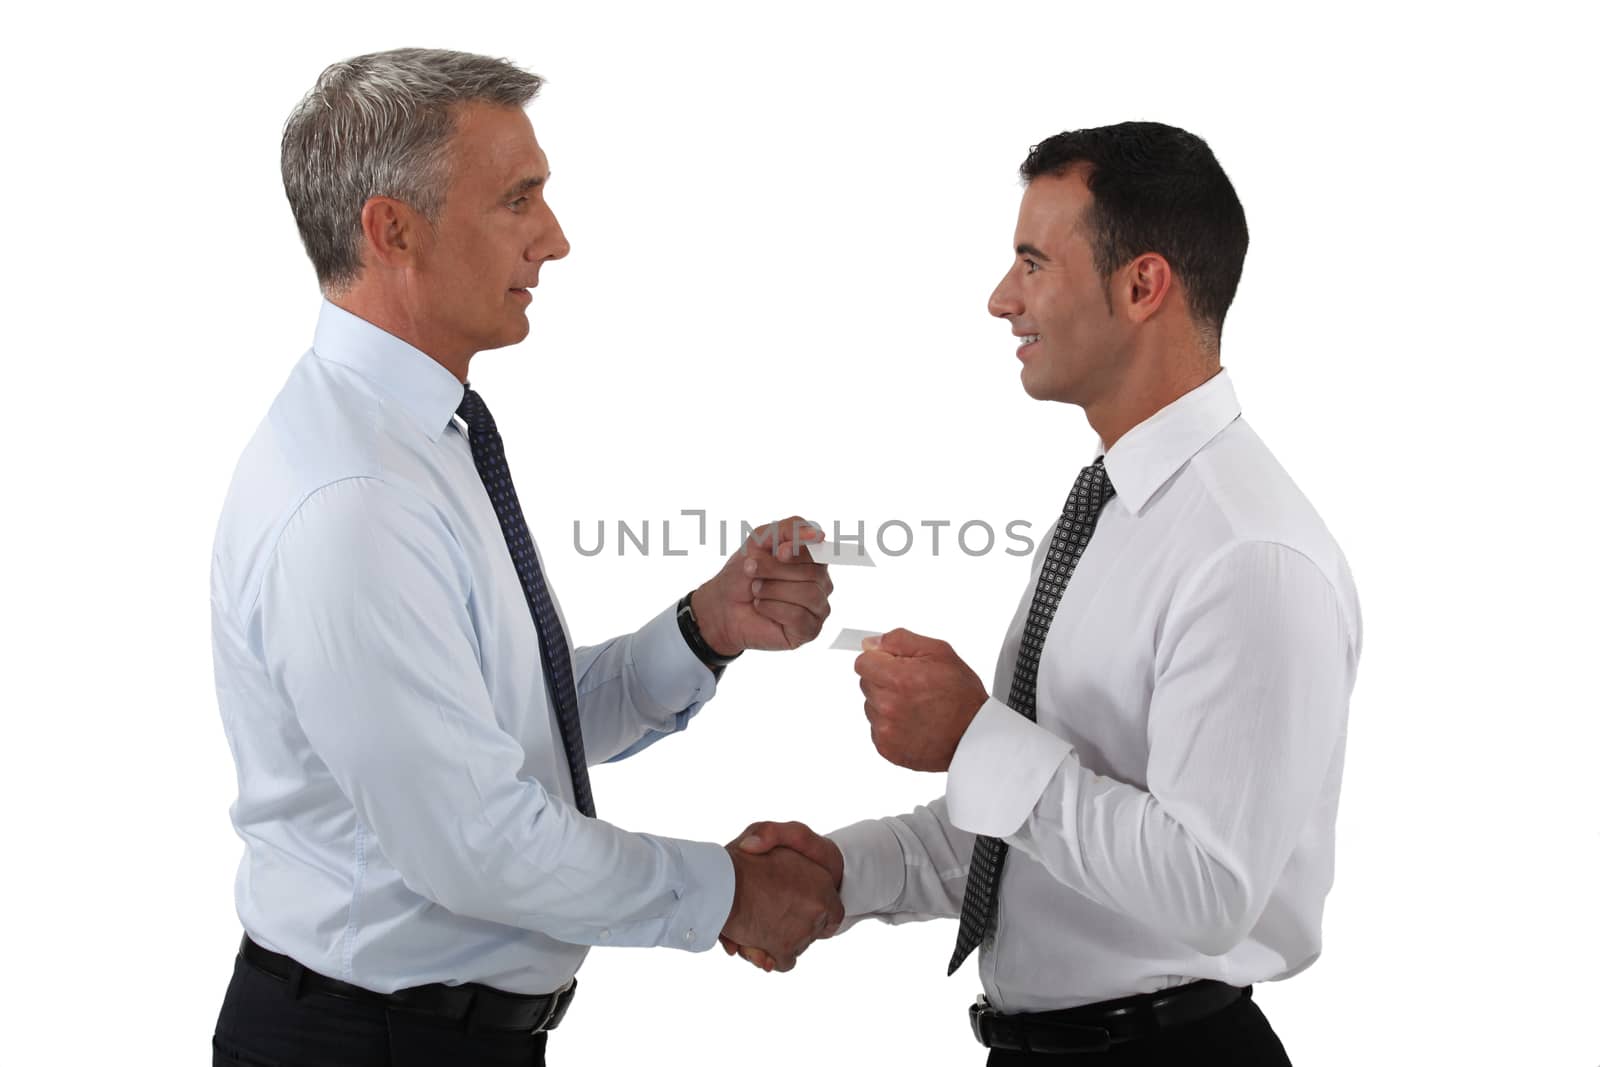 businessmen shaking hands and exchanging cards